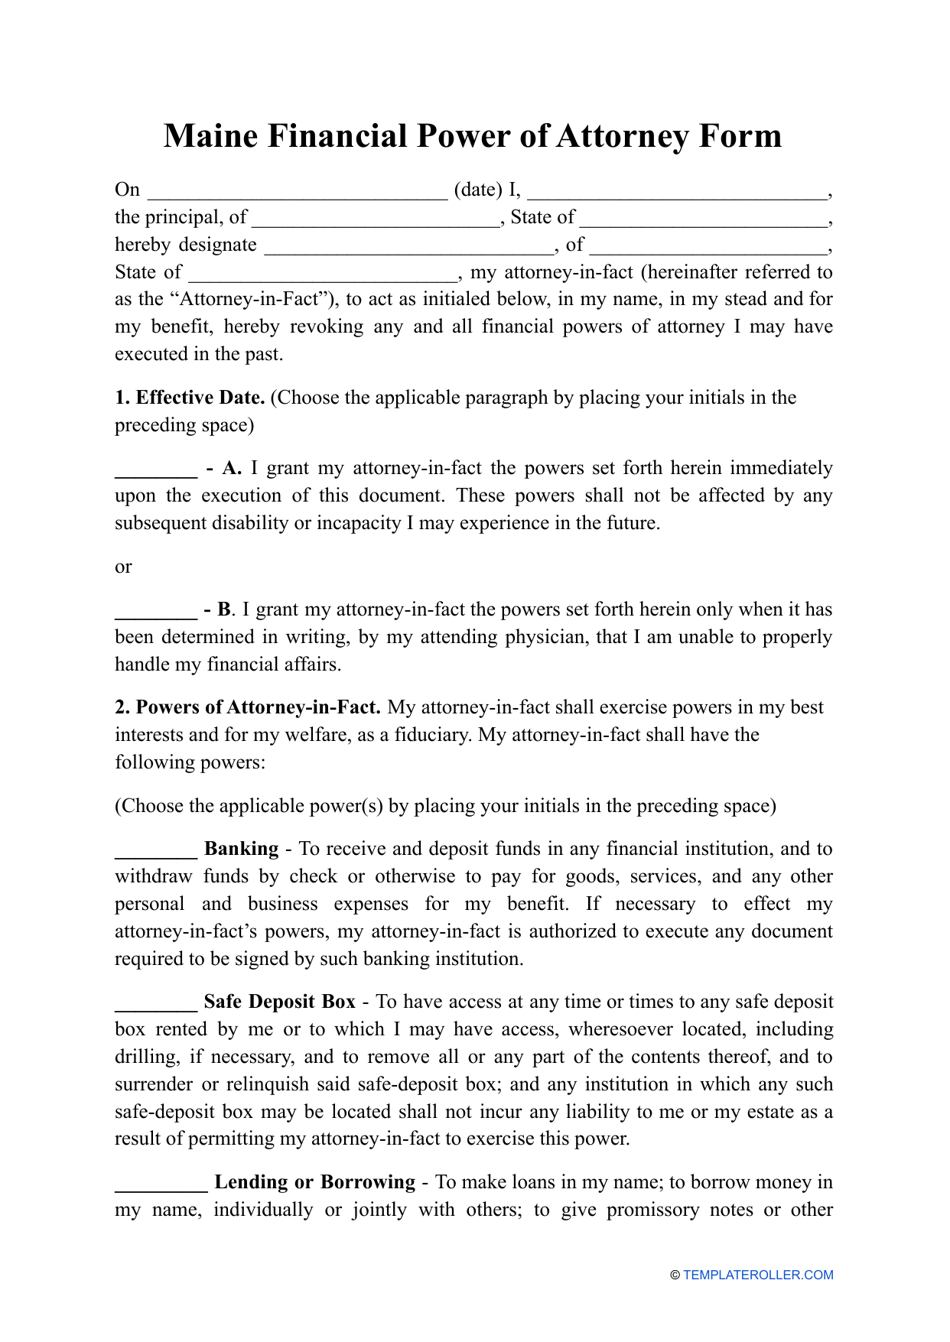 Financial Power of Attorney Form - Maine, Page 1